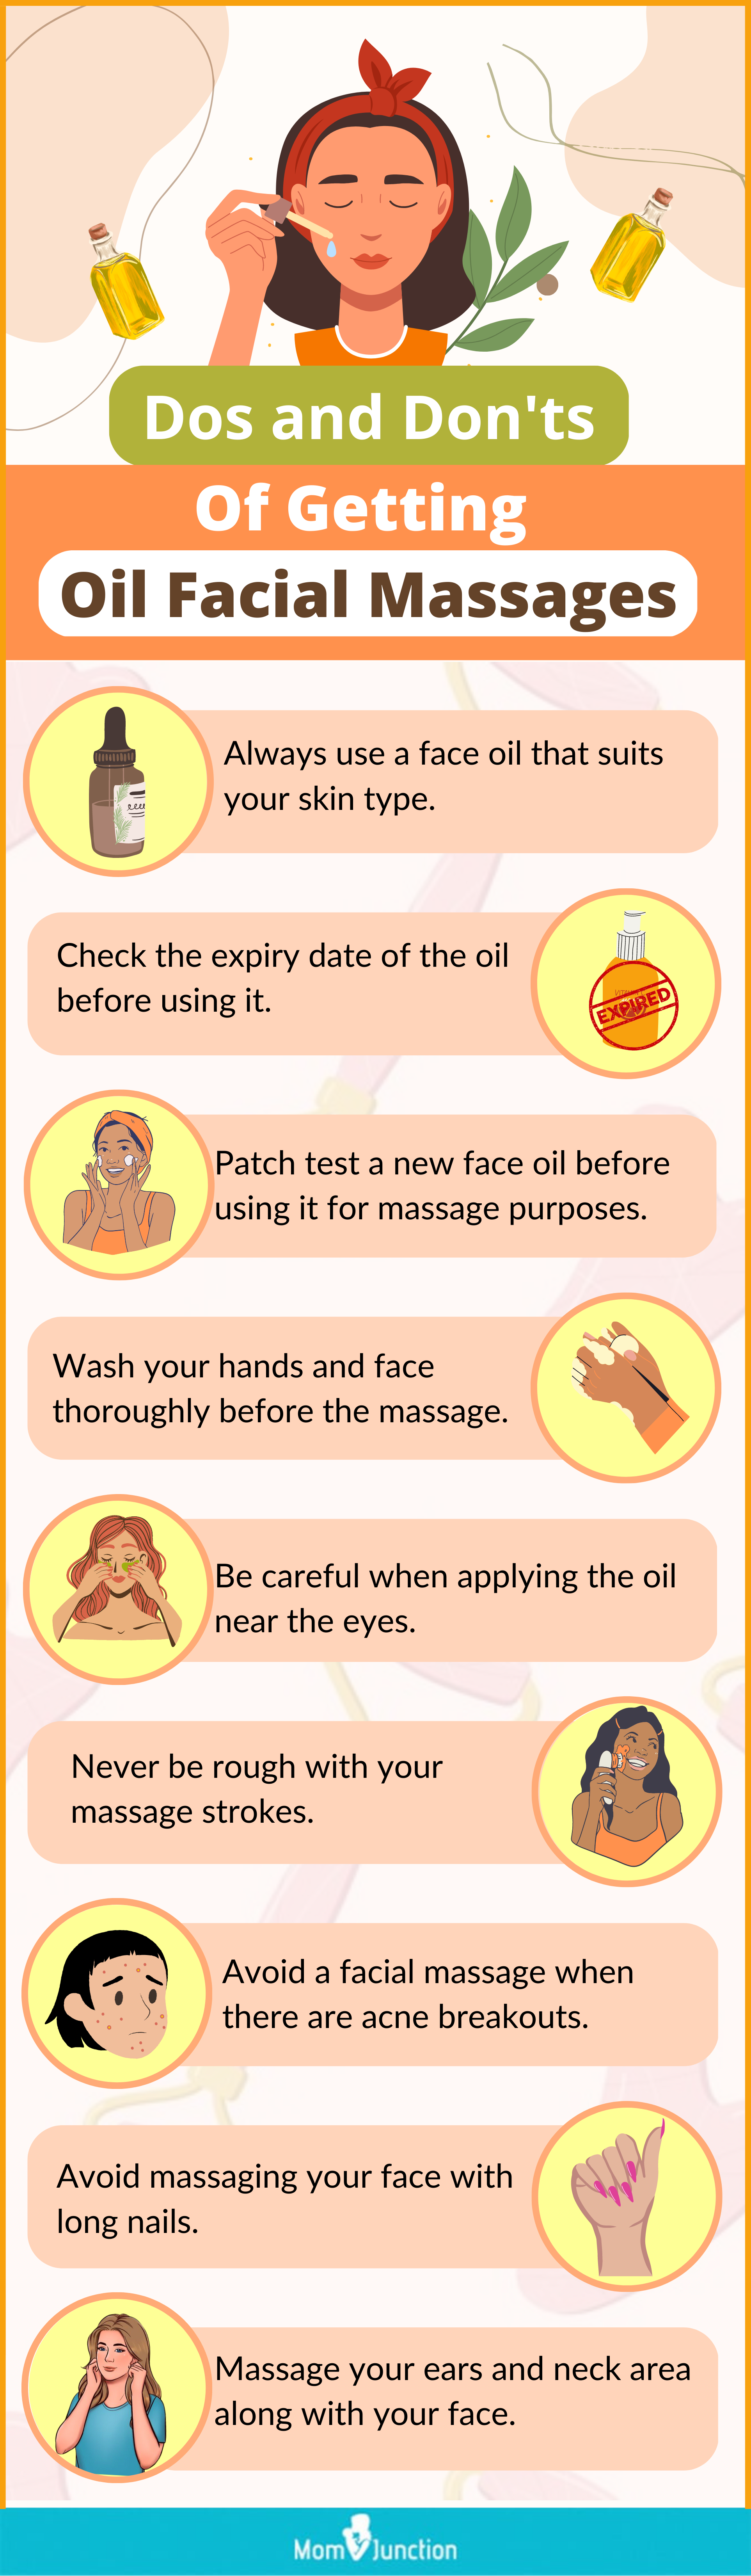 Dos And Don’ts Of Getting Oil Facial Massages (infographic)